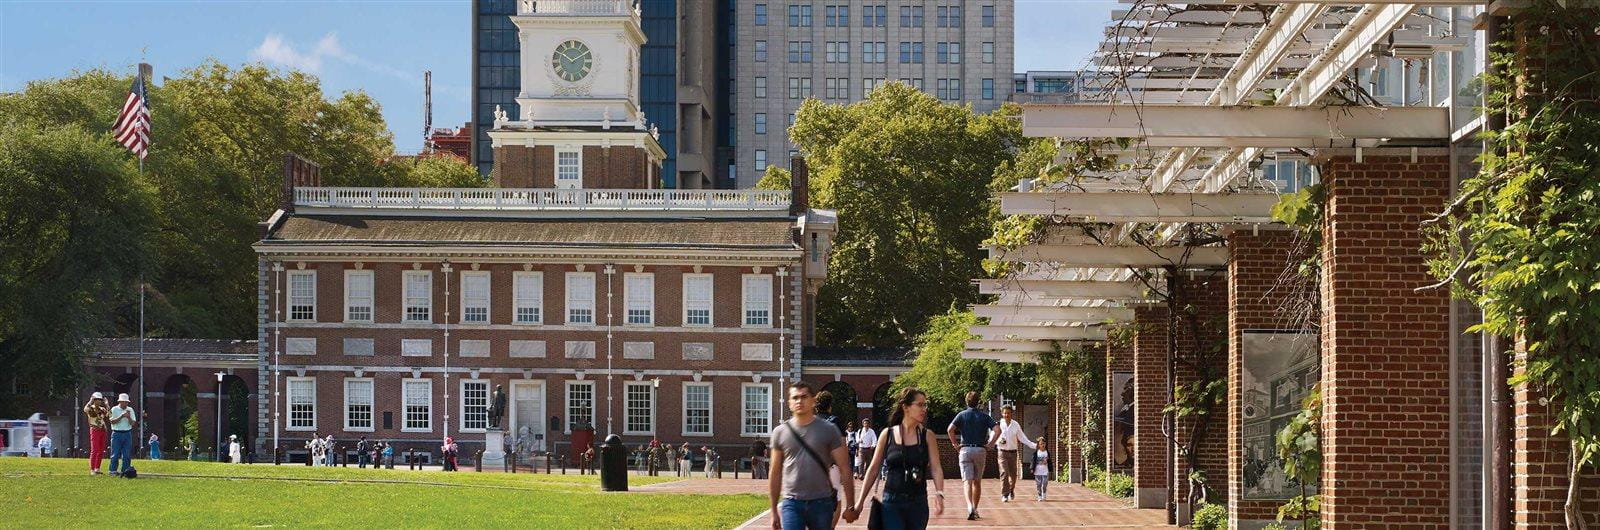 Students walking through Philadelphia's Independence Mall